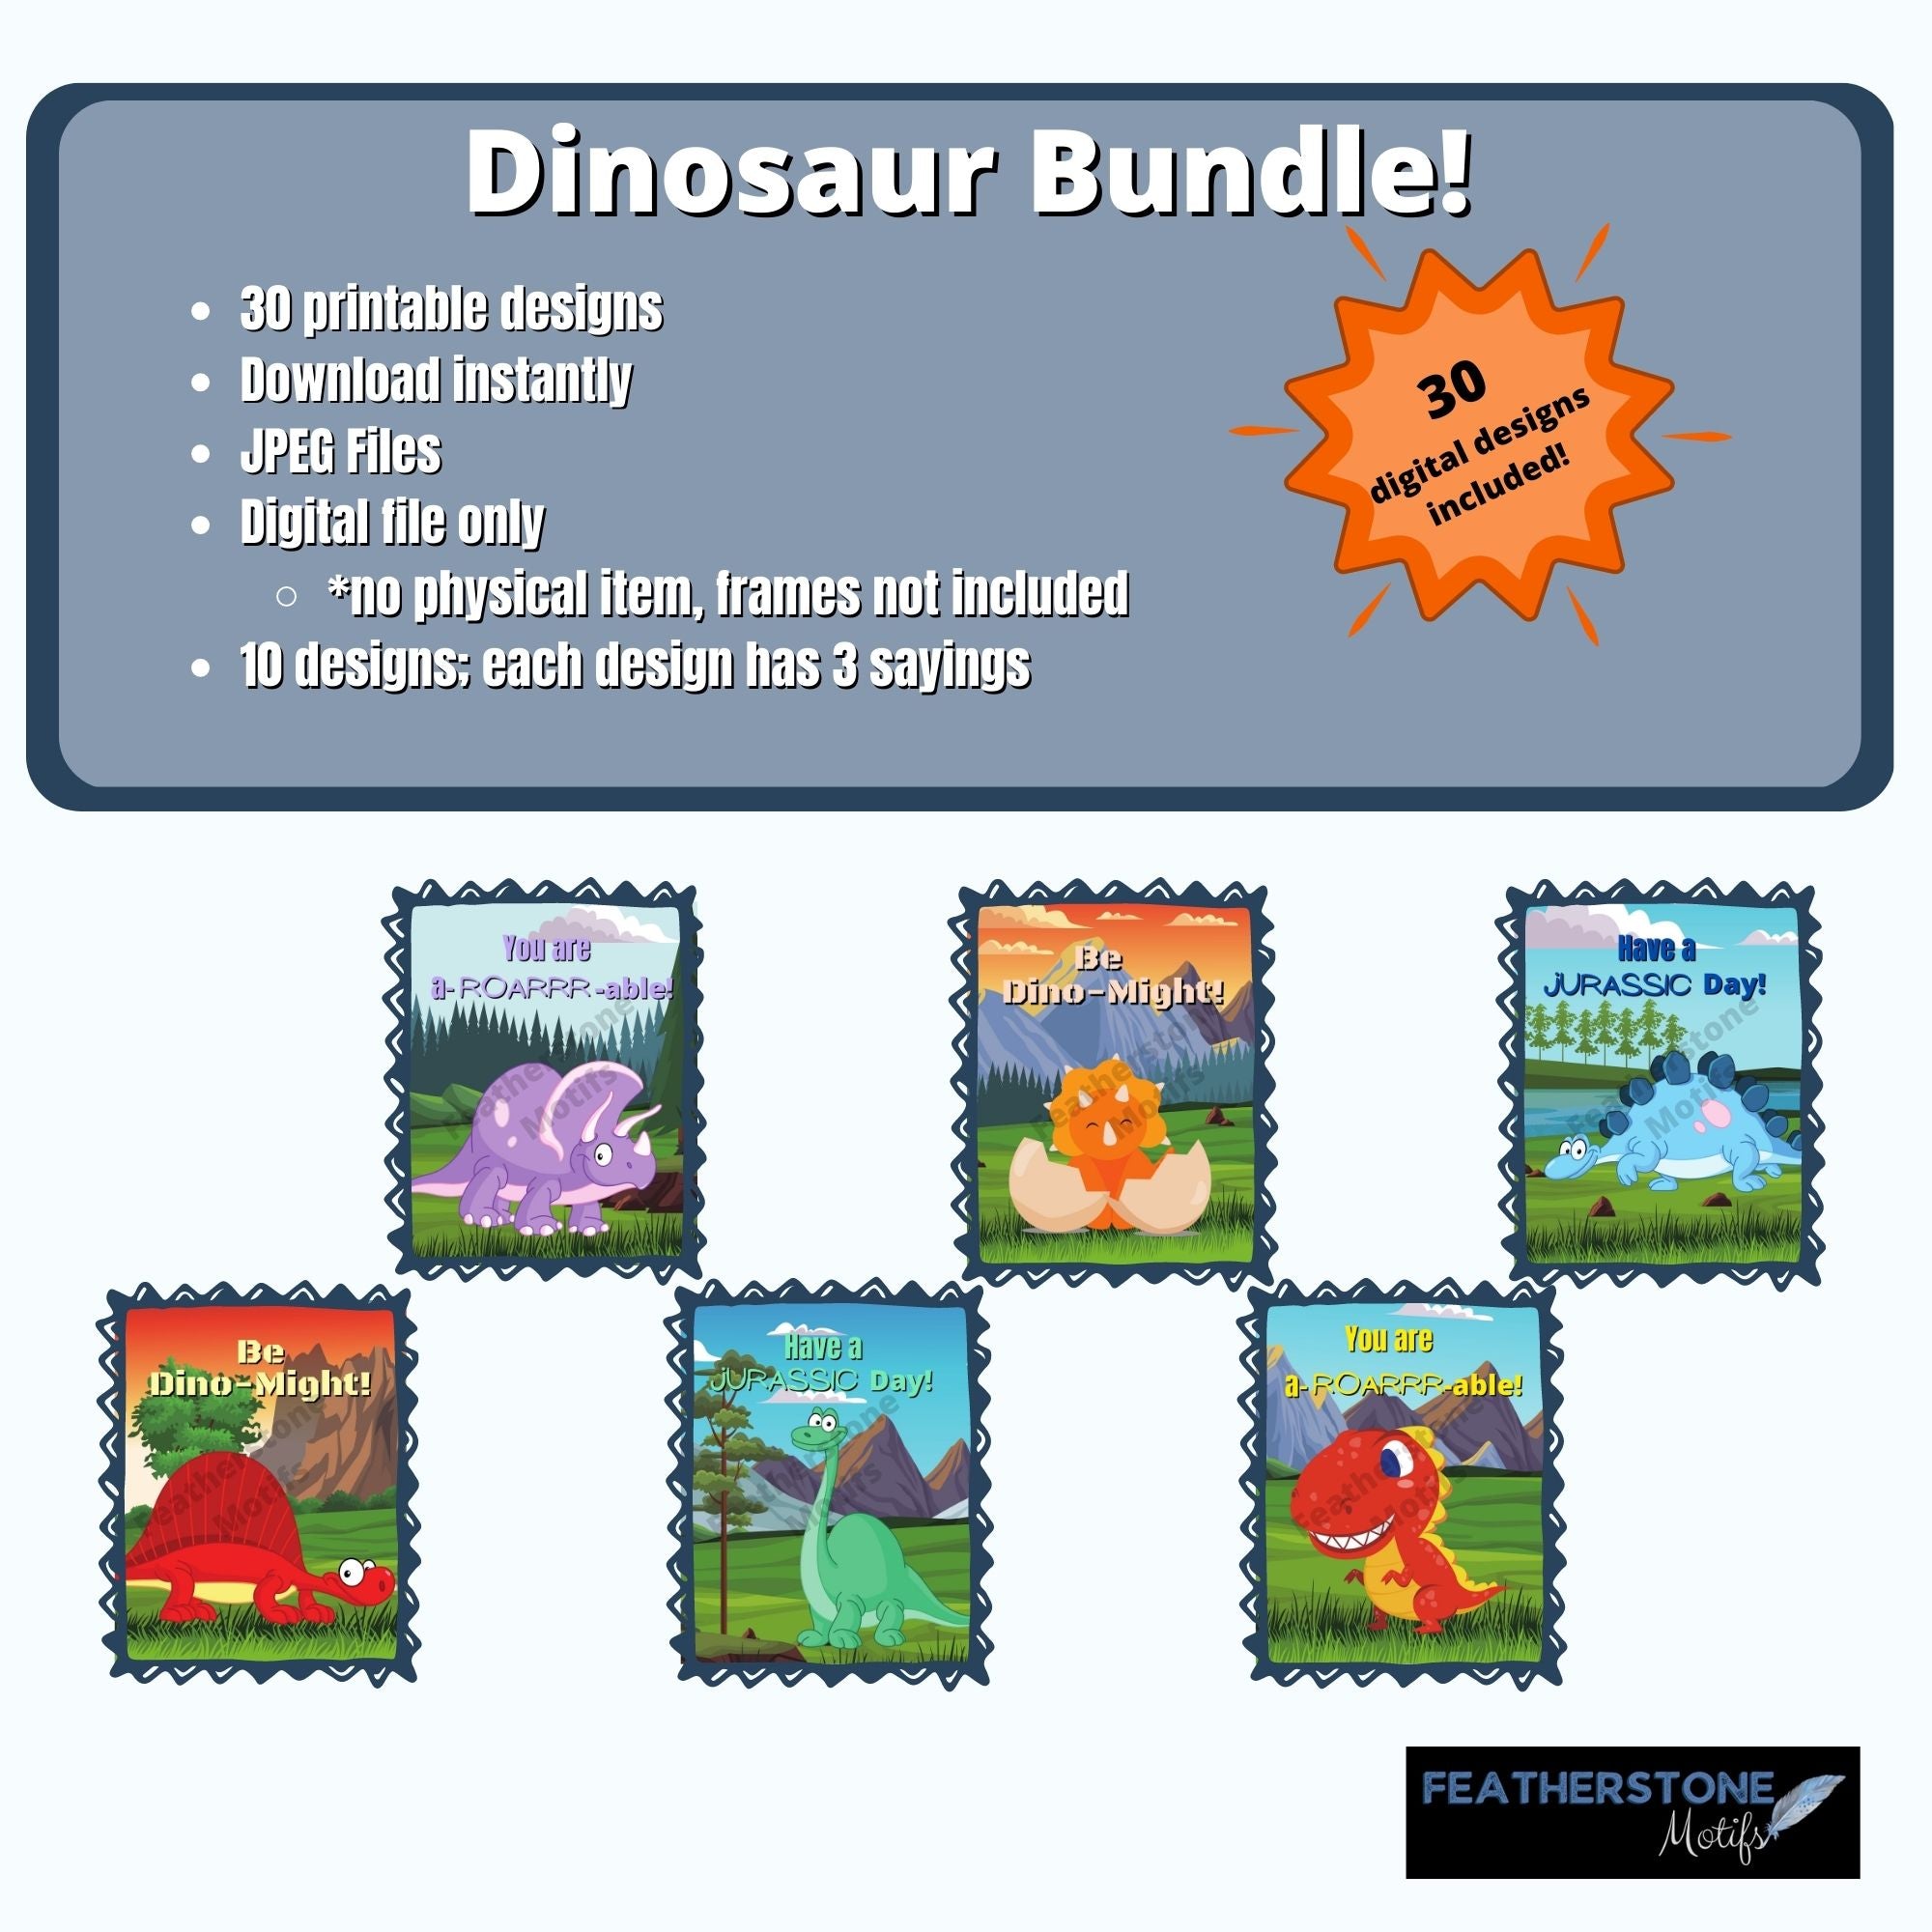 This digital download will allow you to instantly download images of A-ROARR-ABLE dinosaurs. 